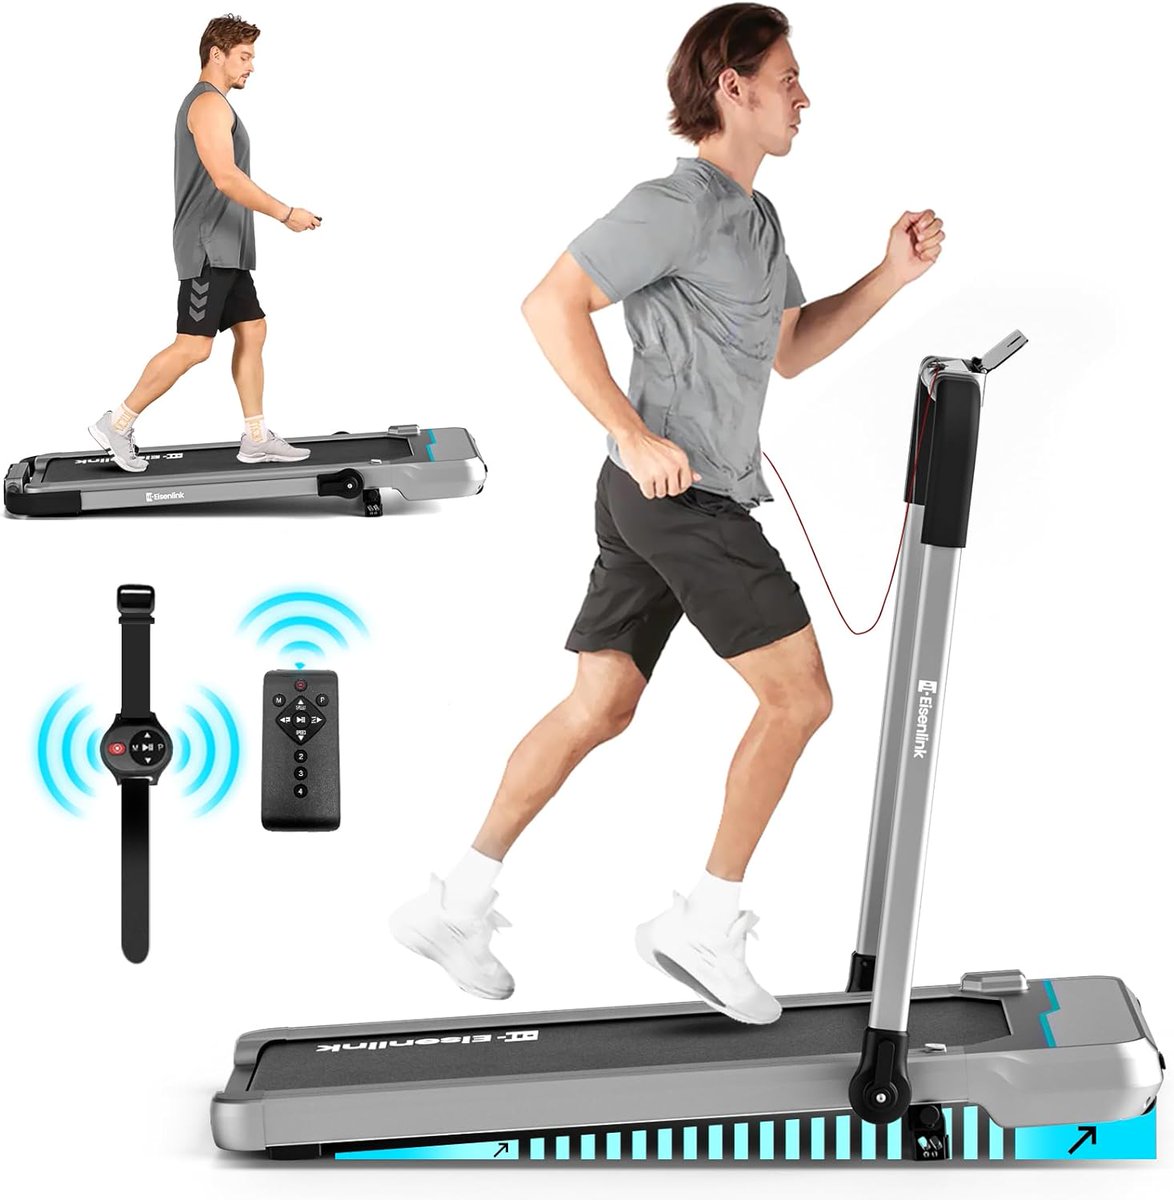 Eisenlink 2 in 1 Foldable Treadmill Under Desk for Home with Incline APP Control Portable Walking Treadmill Quiet... #Eisenlink #Eisenlink2in1FoldableTreadmill #FoldingTreadmill #RunningMachine #2in1FoldableTreadmill #WalkingTreadmill pinterest.com/pin/5956714882…